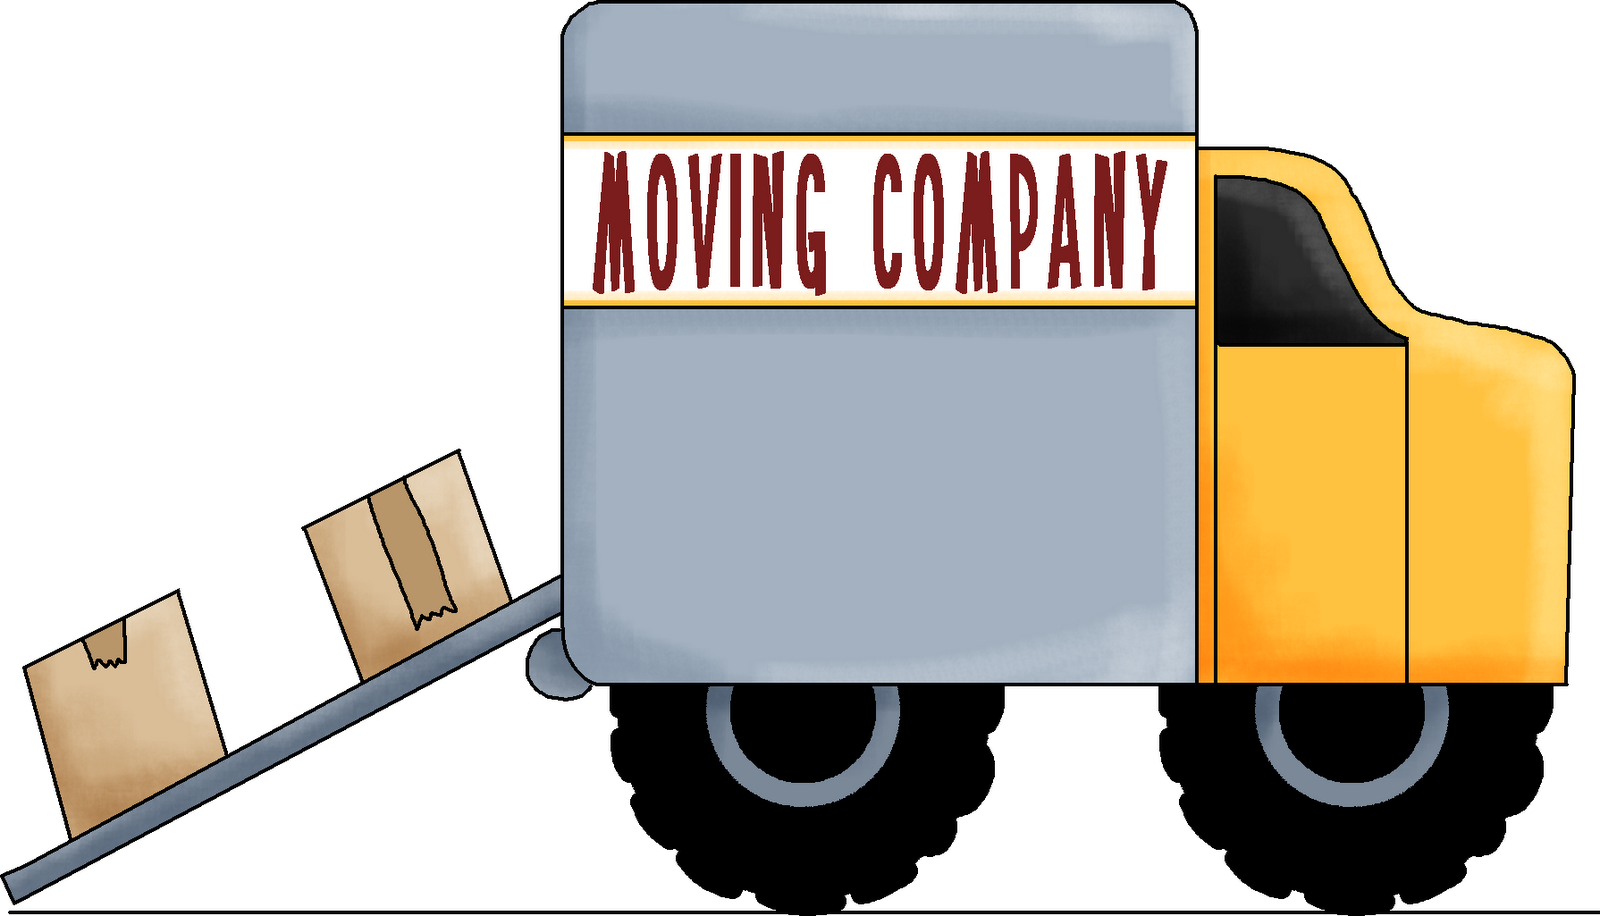 Moving clipart